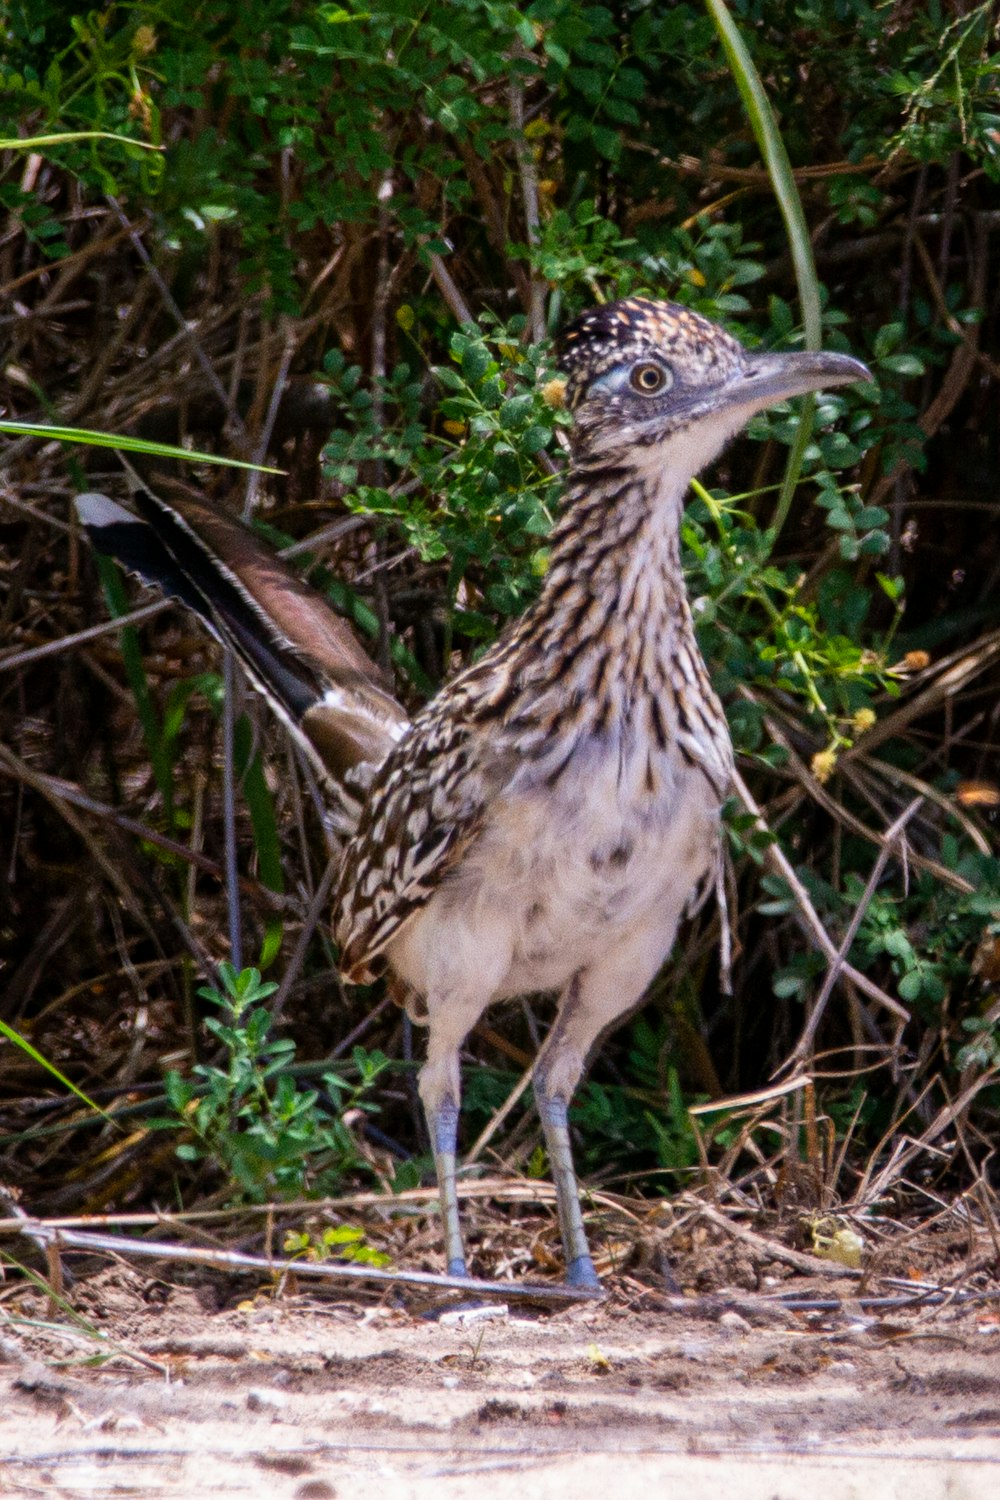 a bird standing on the ground in front of bushes